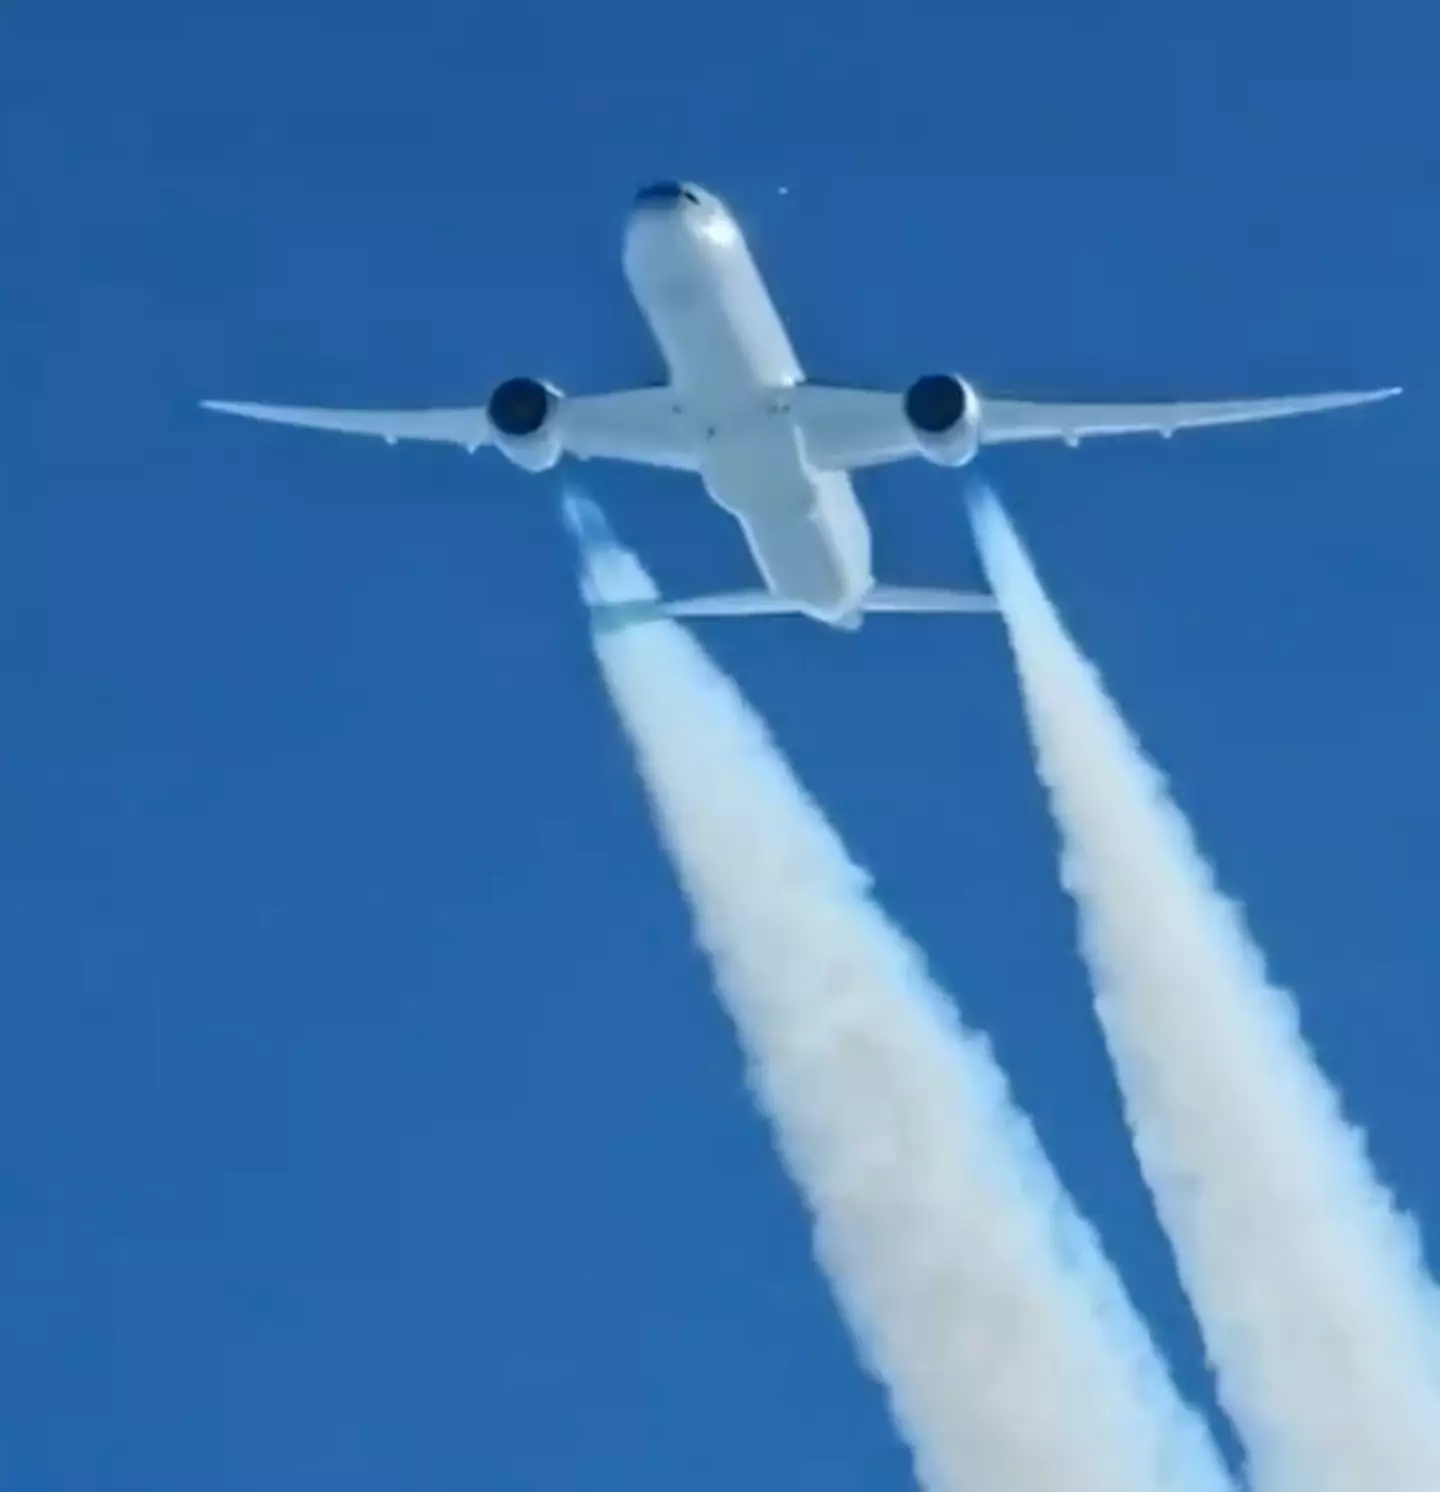 A video shows how fast planes really travel.